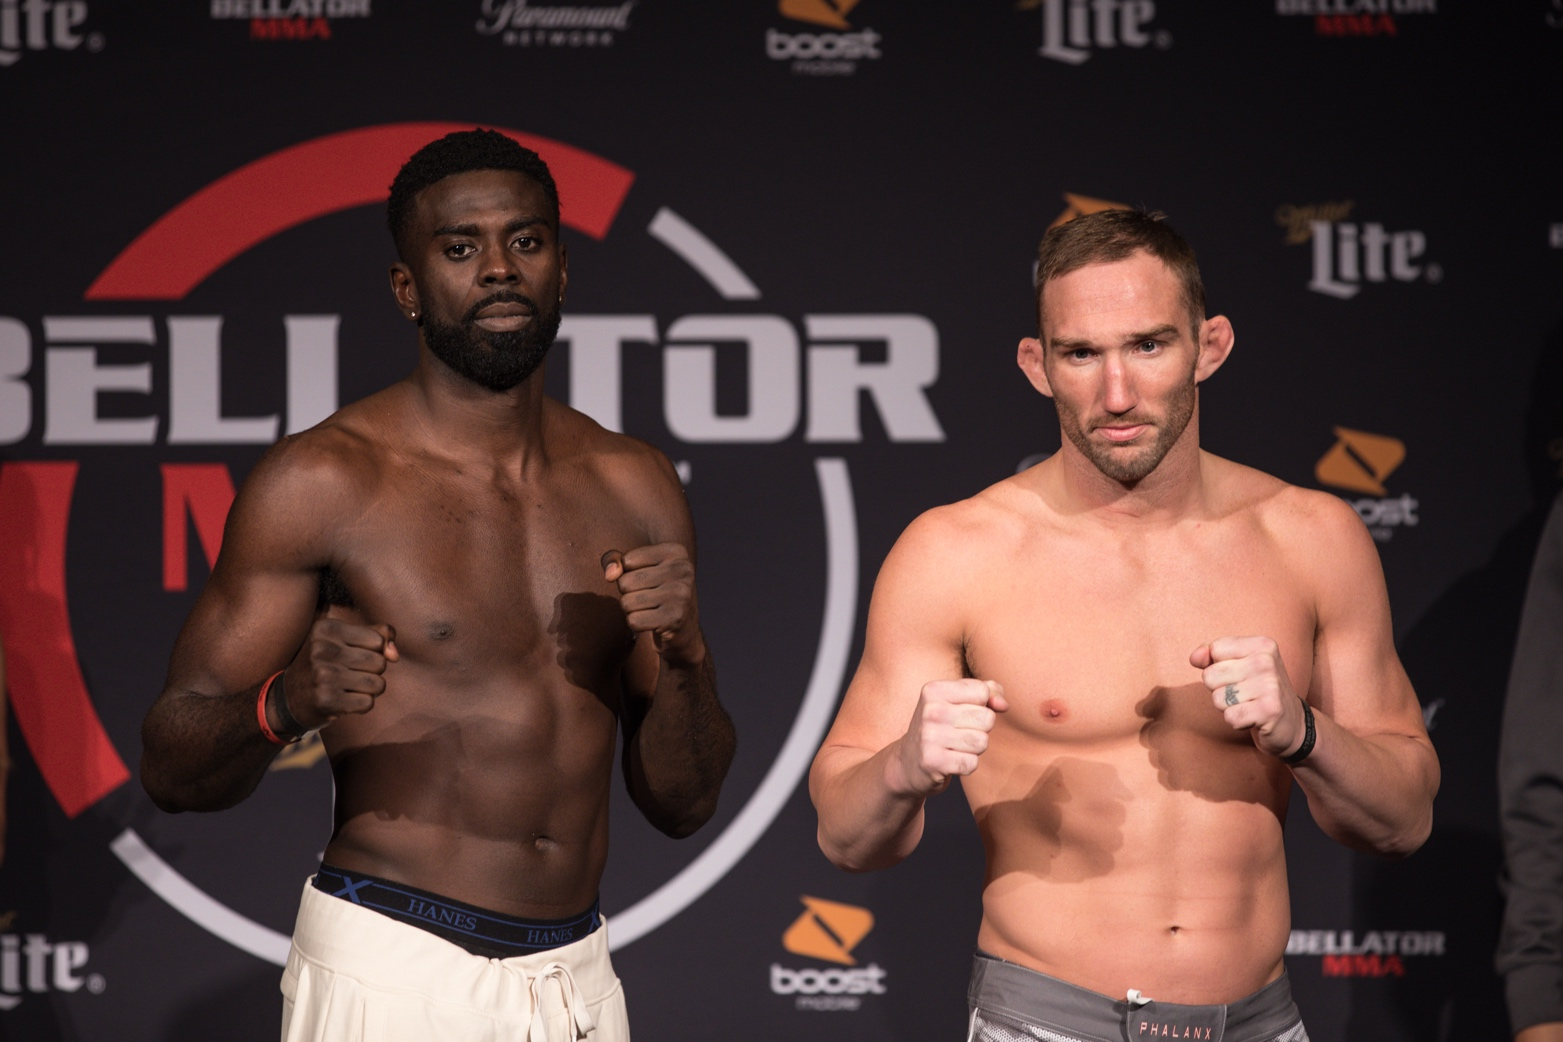 Bellator 210: Njokuani vs. Salter Weigh-In Results1563 x 1042